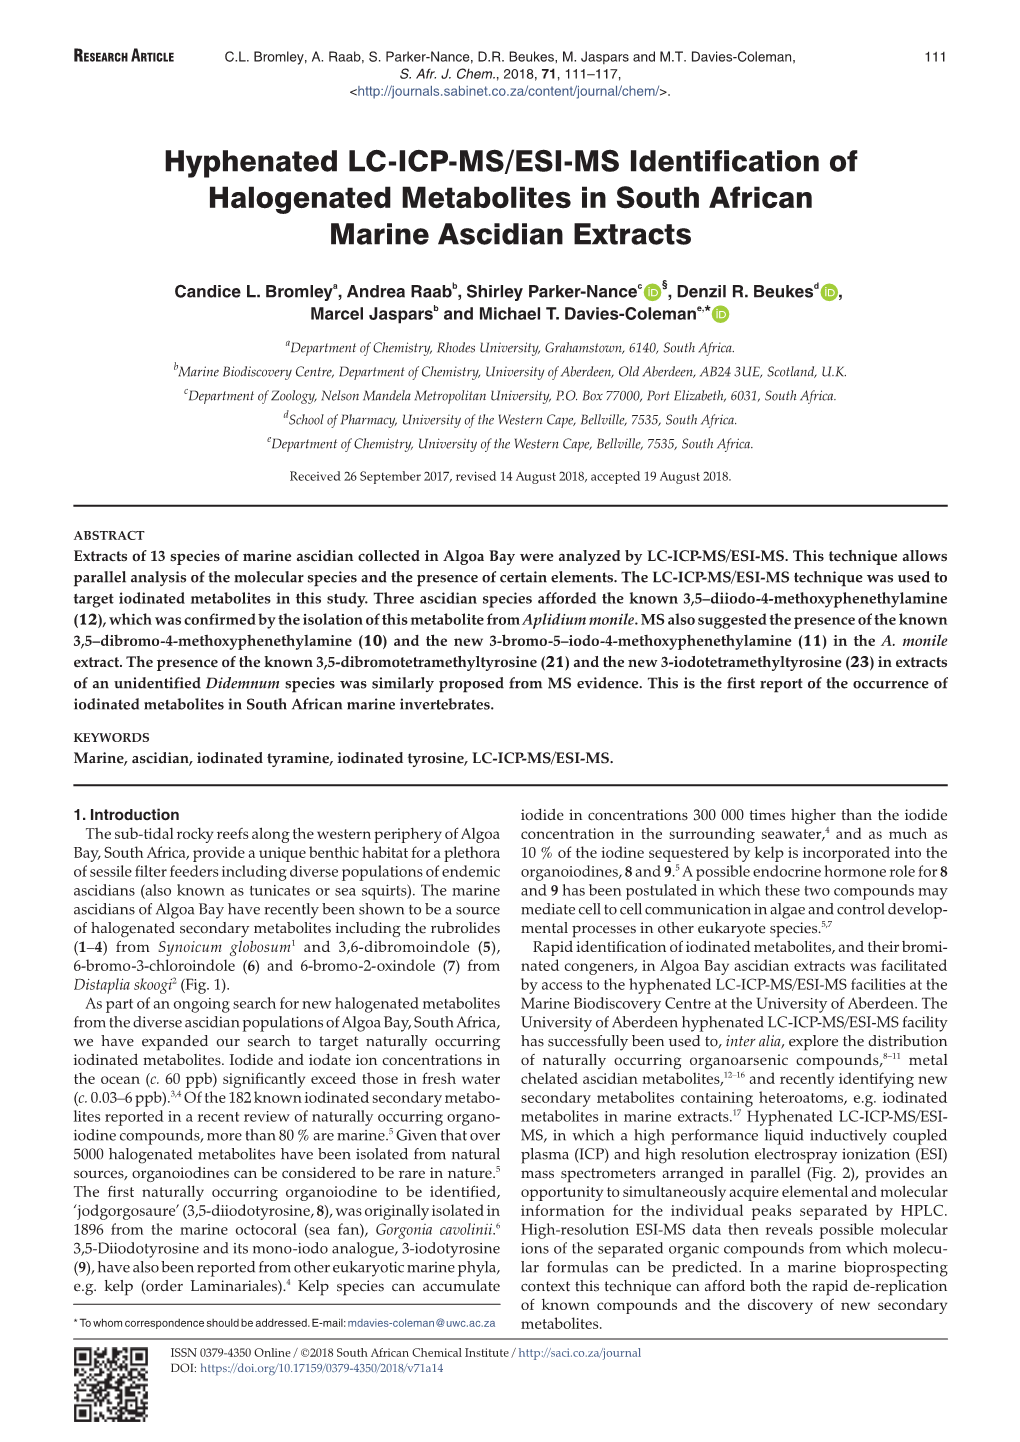 Hyphenated LC-ICP-MS/ESI-MS Identification of Halogenated Metabolites in South African Marine Ascidian Extracts